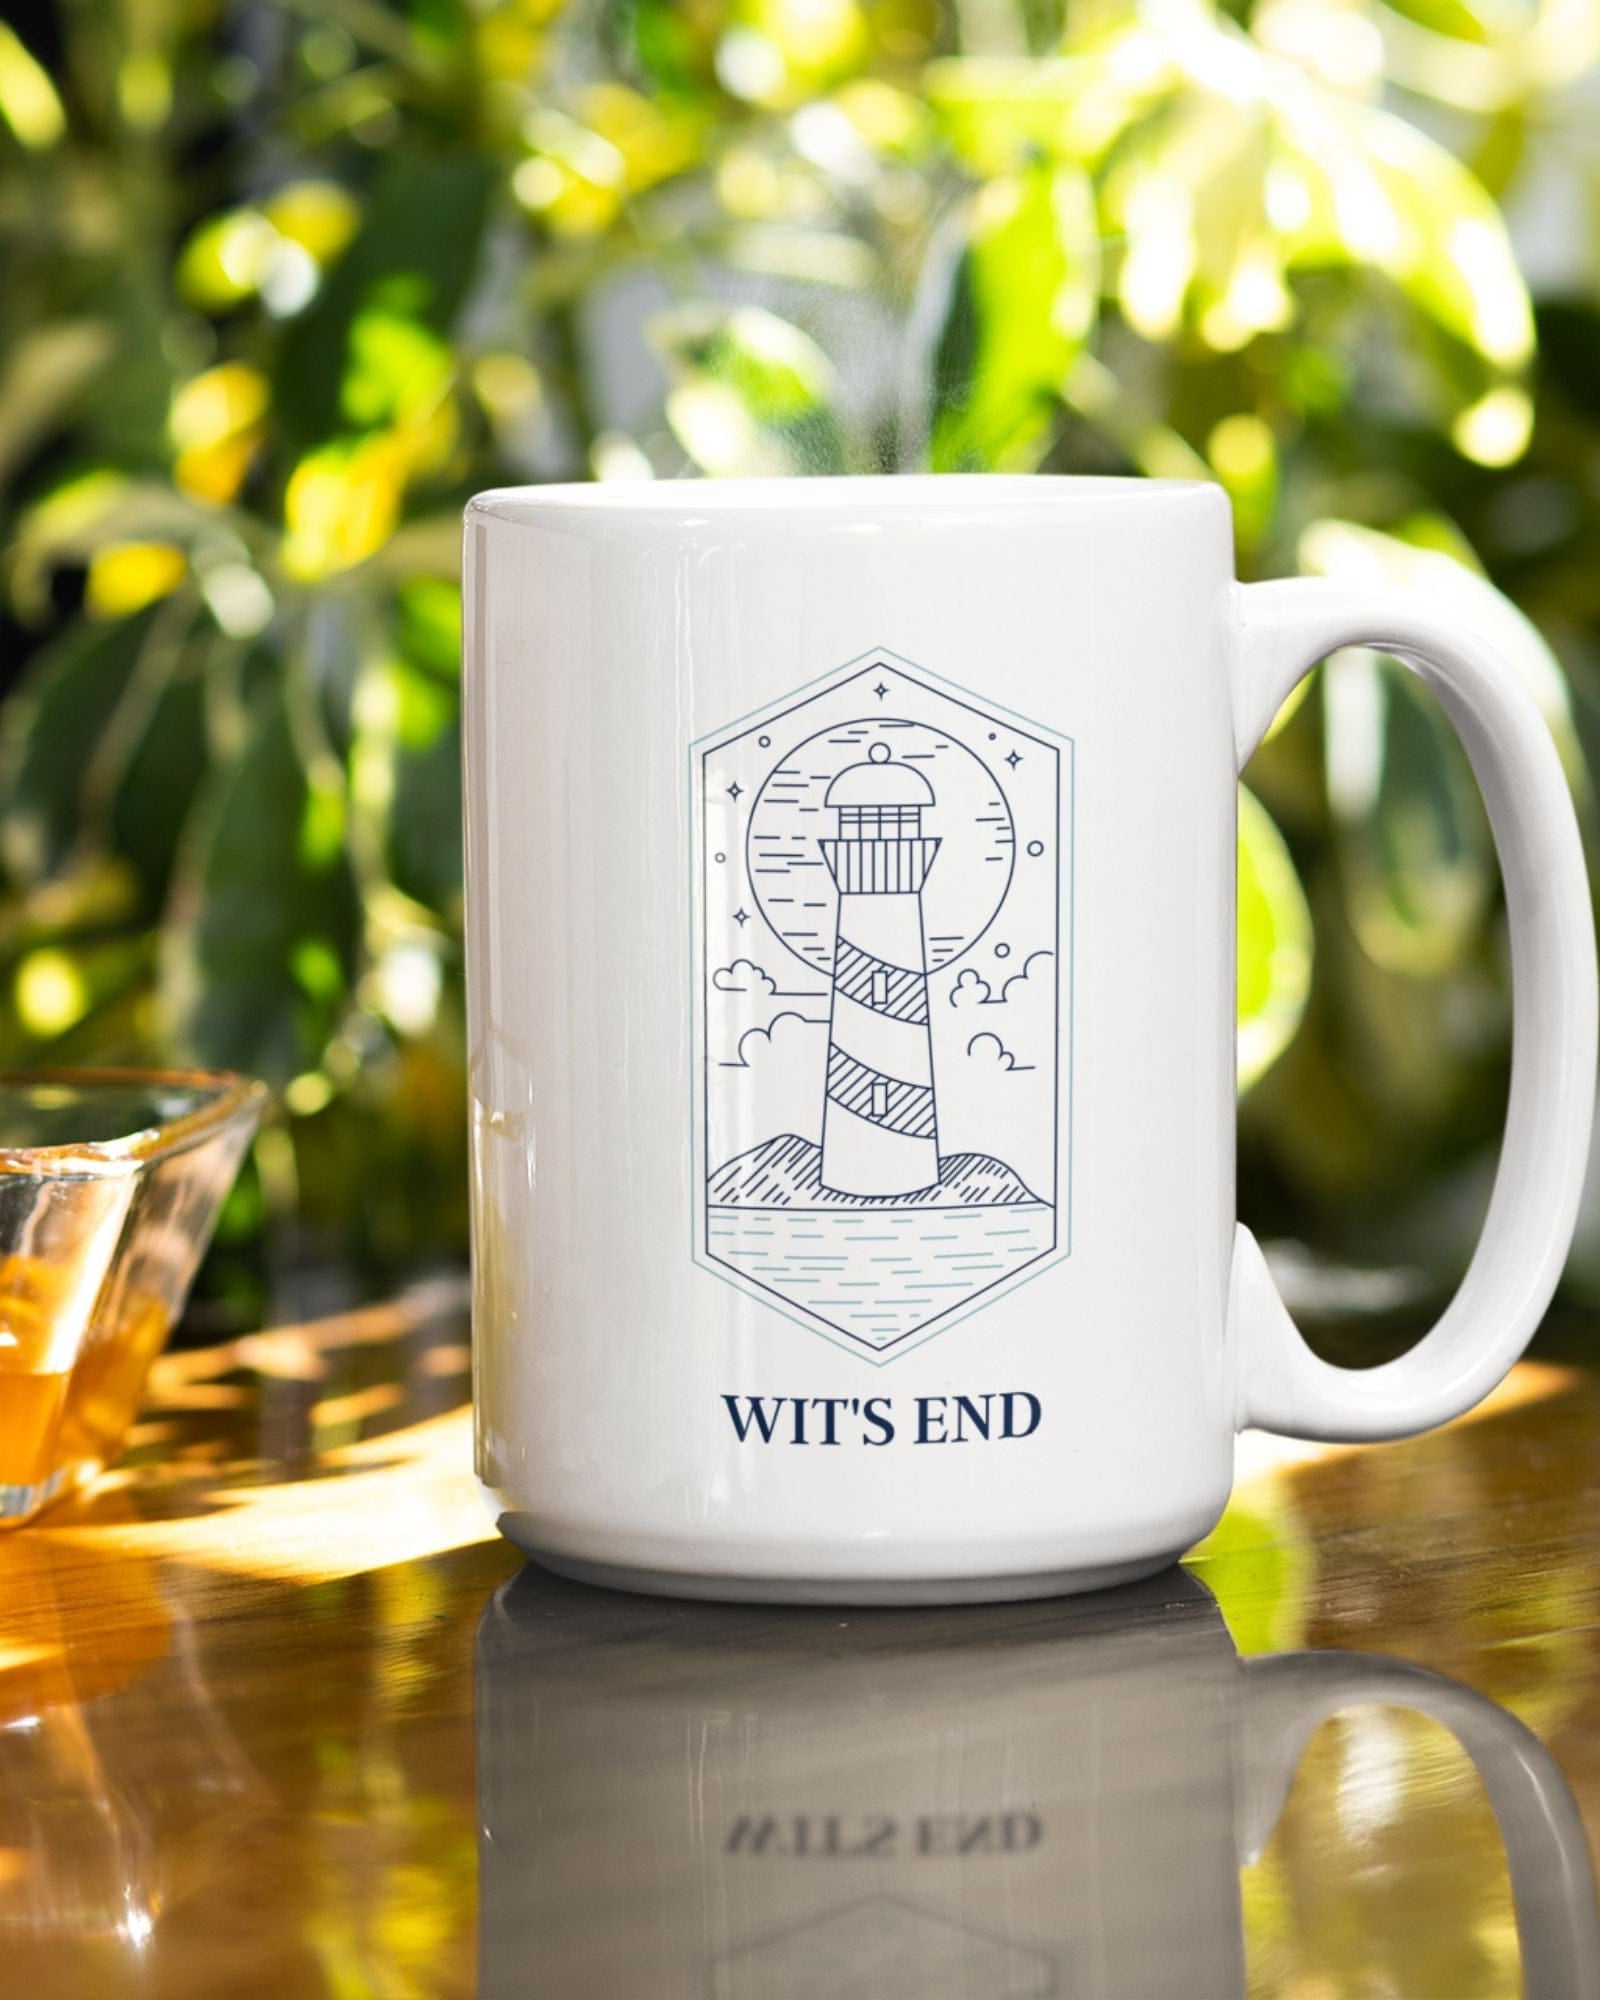 The Wit's End Mug, part of our Cheeky, Brilliant Gifts collection at Jolly & Goode